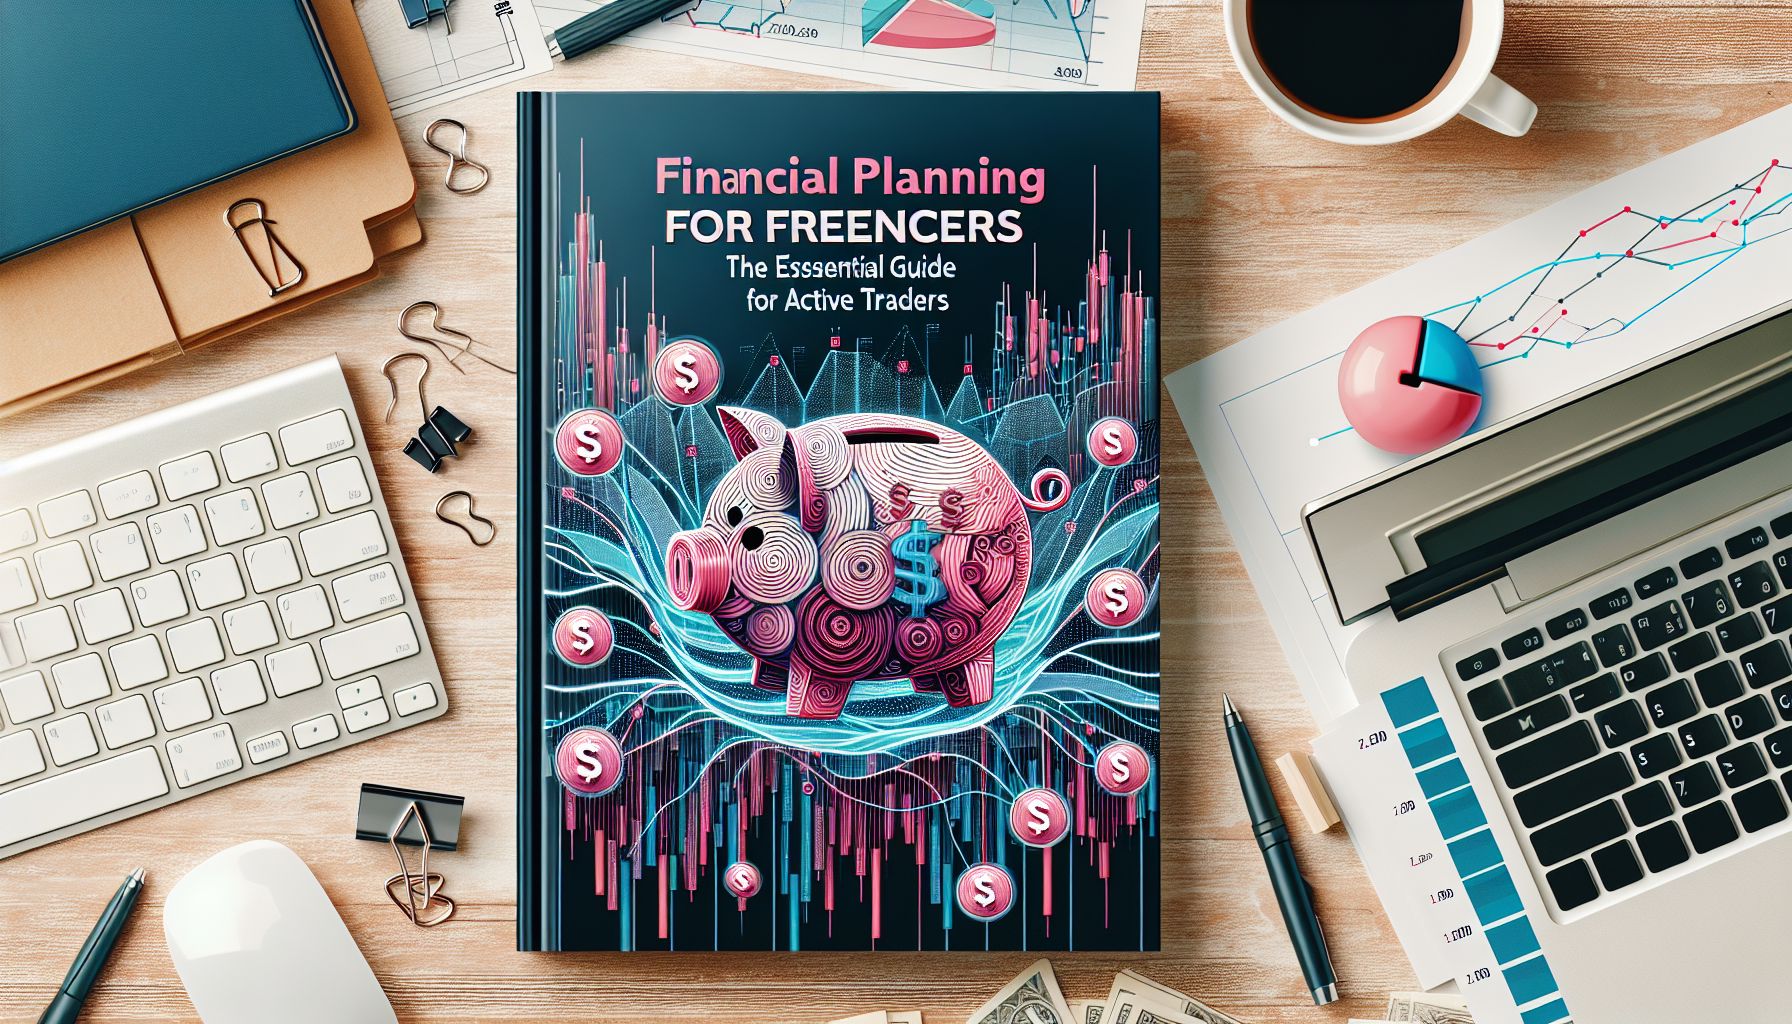 Financial Planning for Freelancers: The Essential Guide for Active Traders